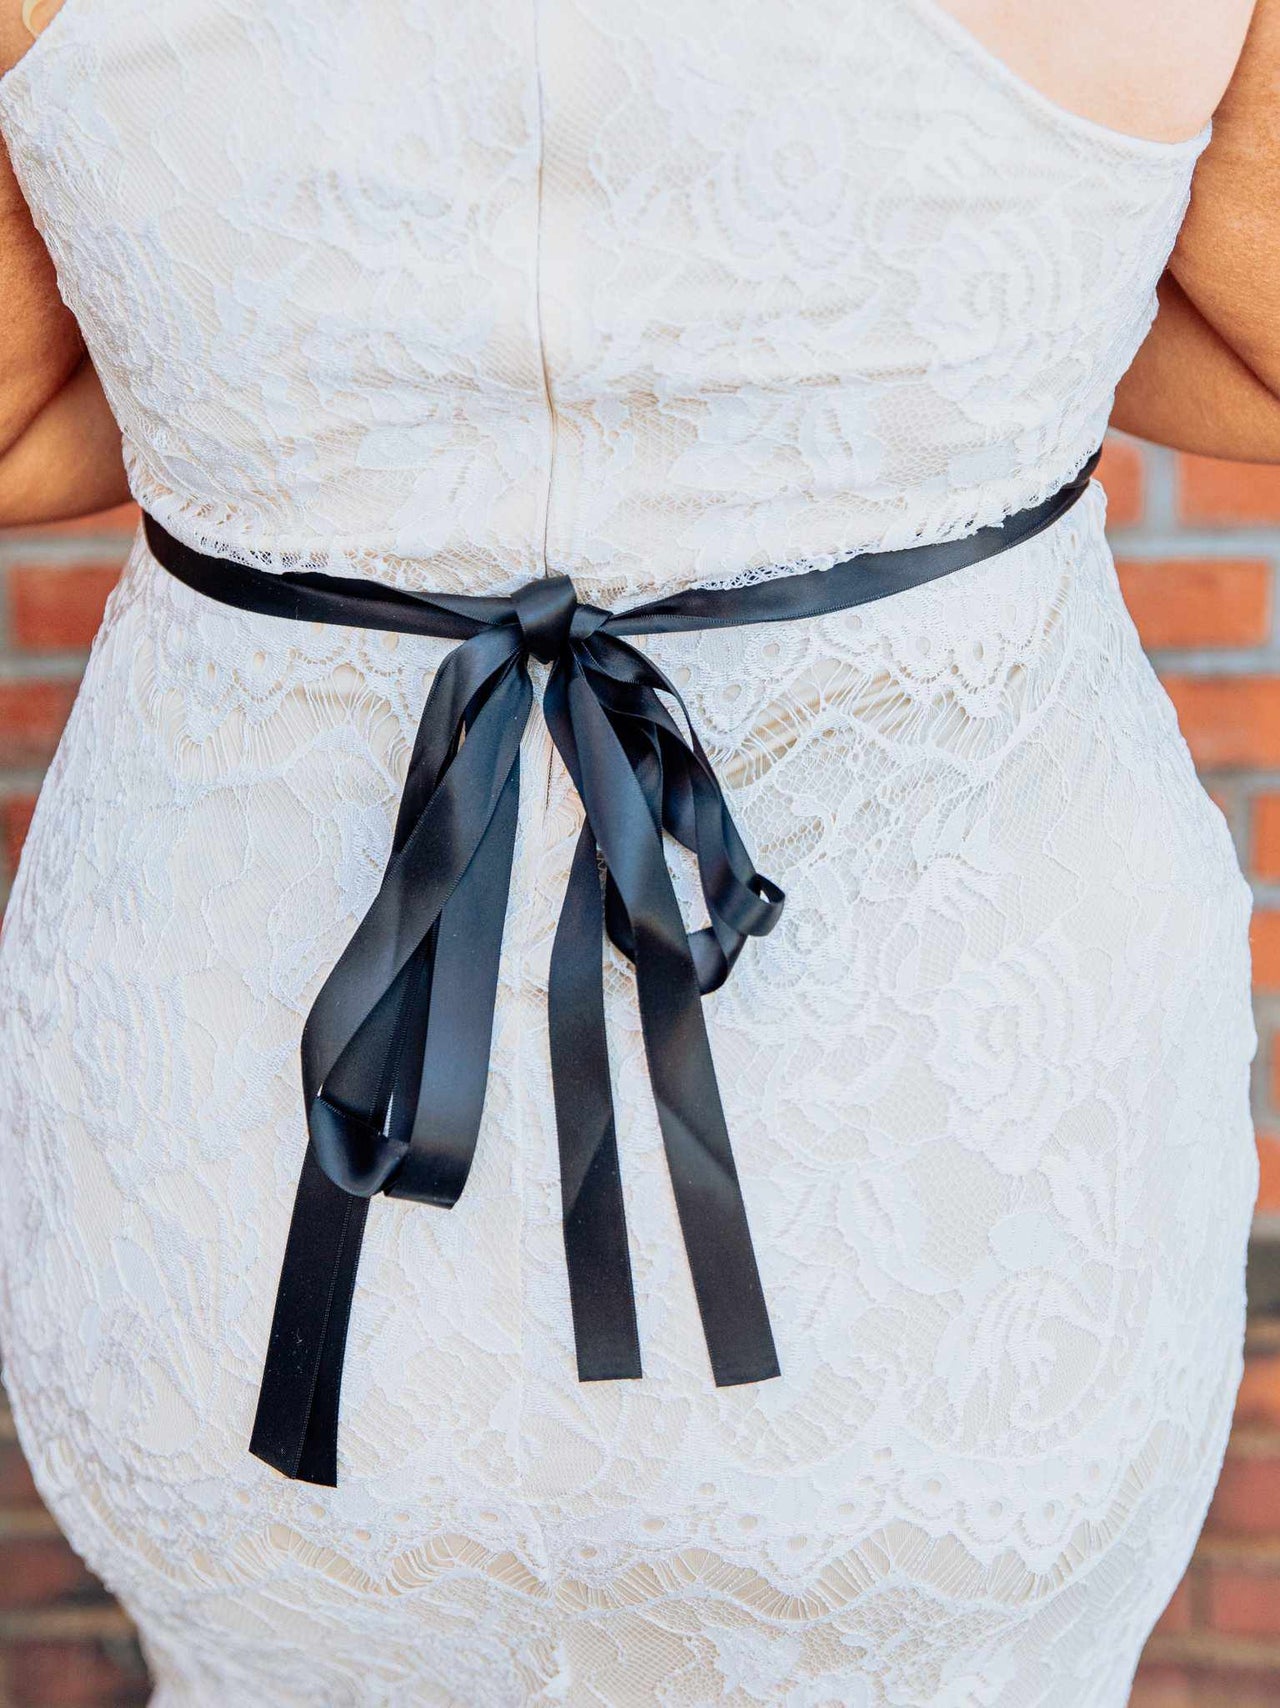 Rhinestone Crowning Moment Belt - Black Ribbon With Silver-Belts-Southern Fried Chics